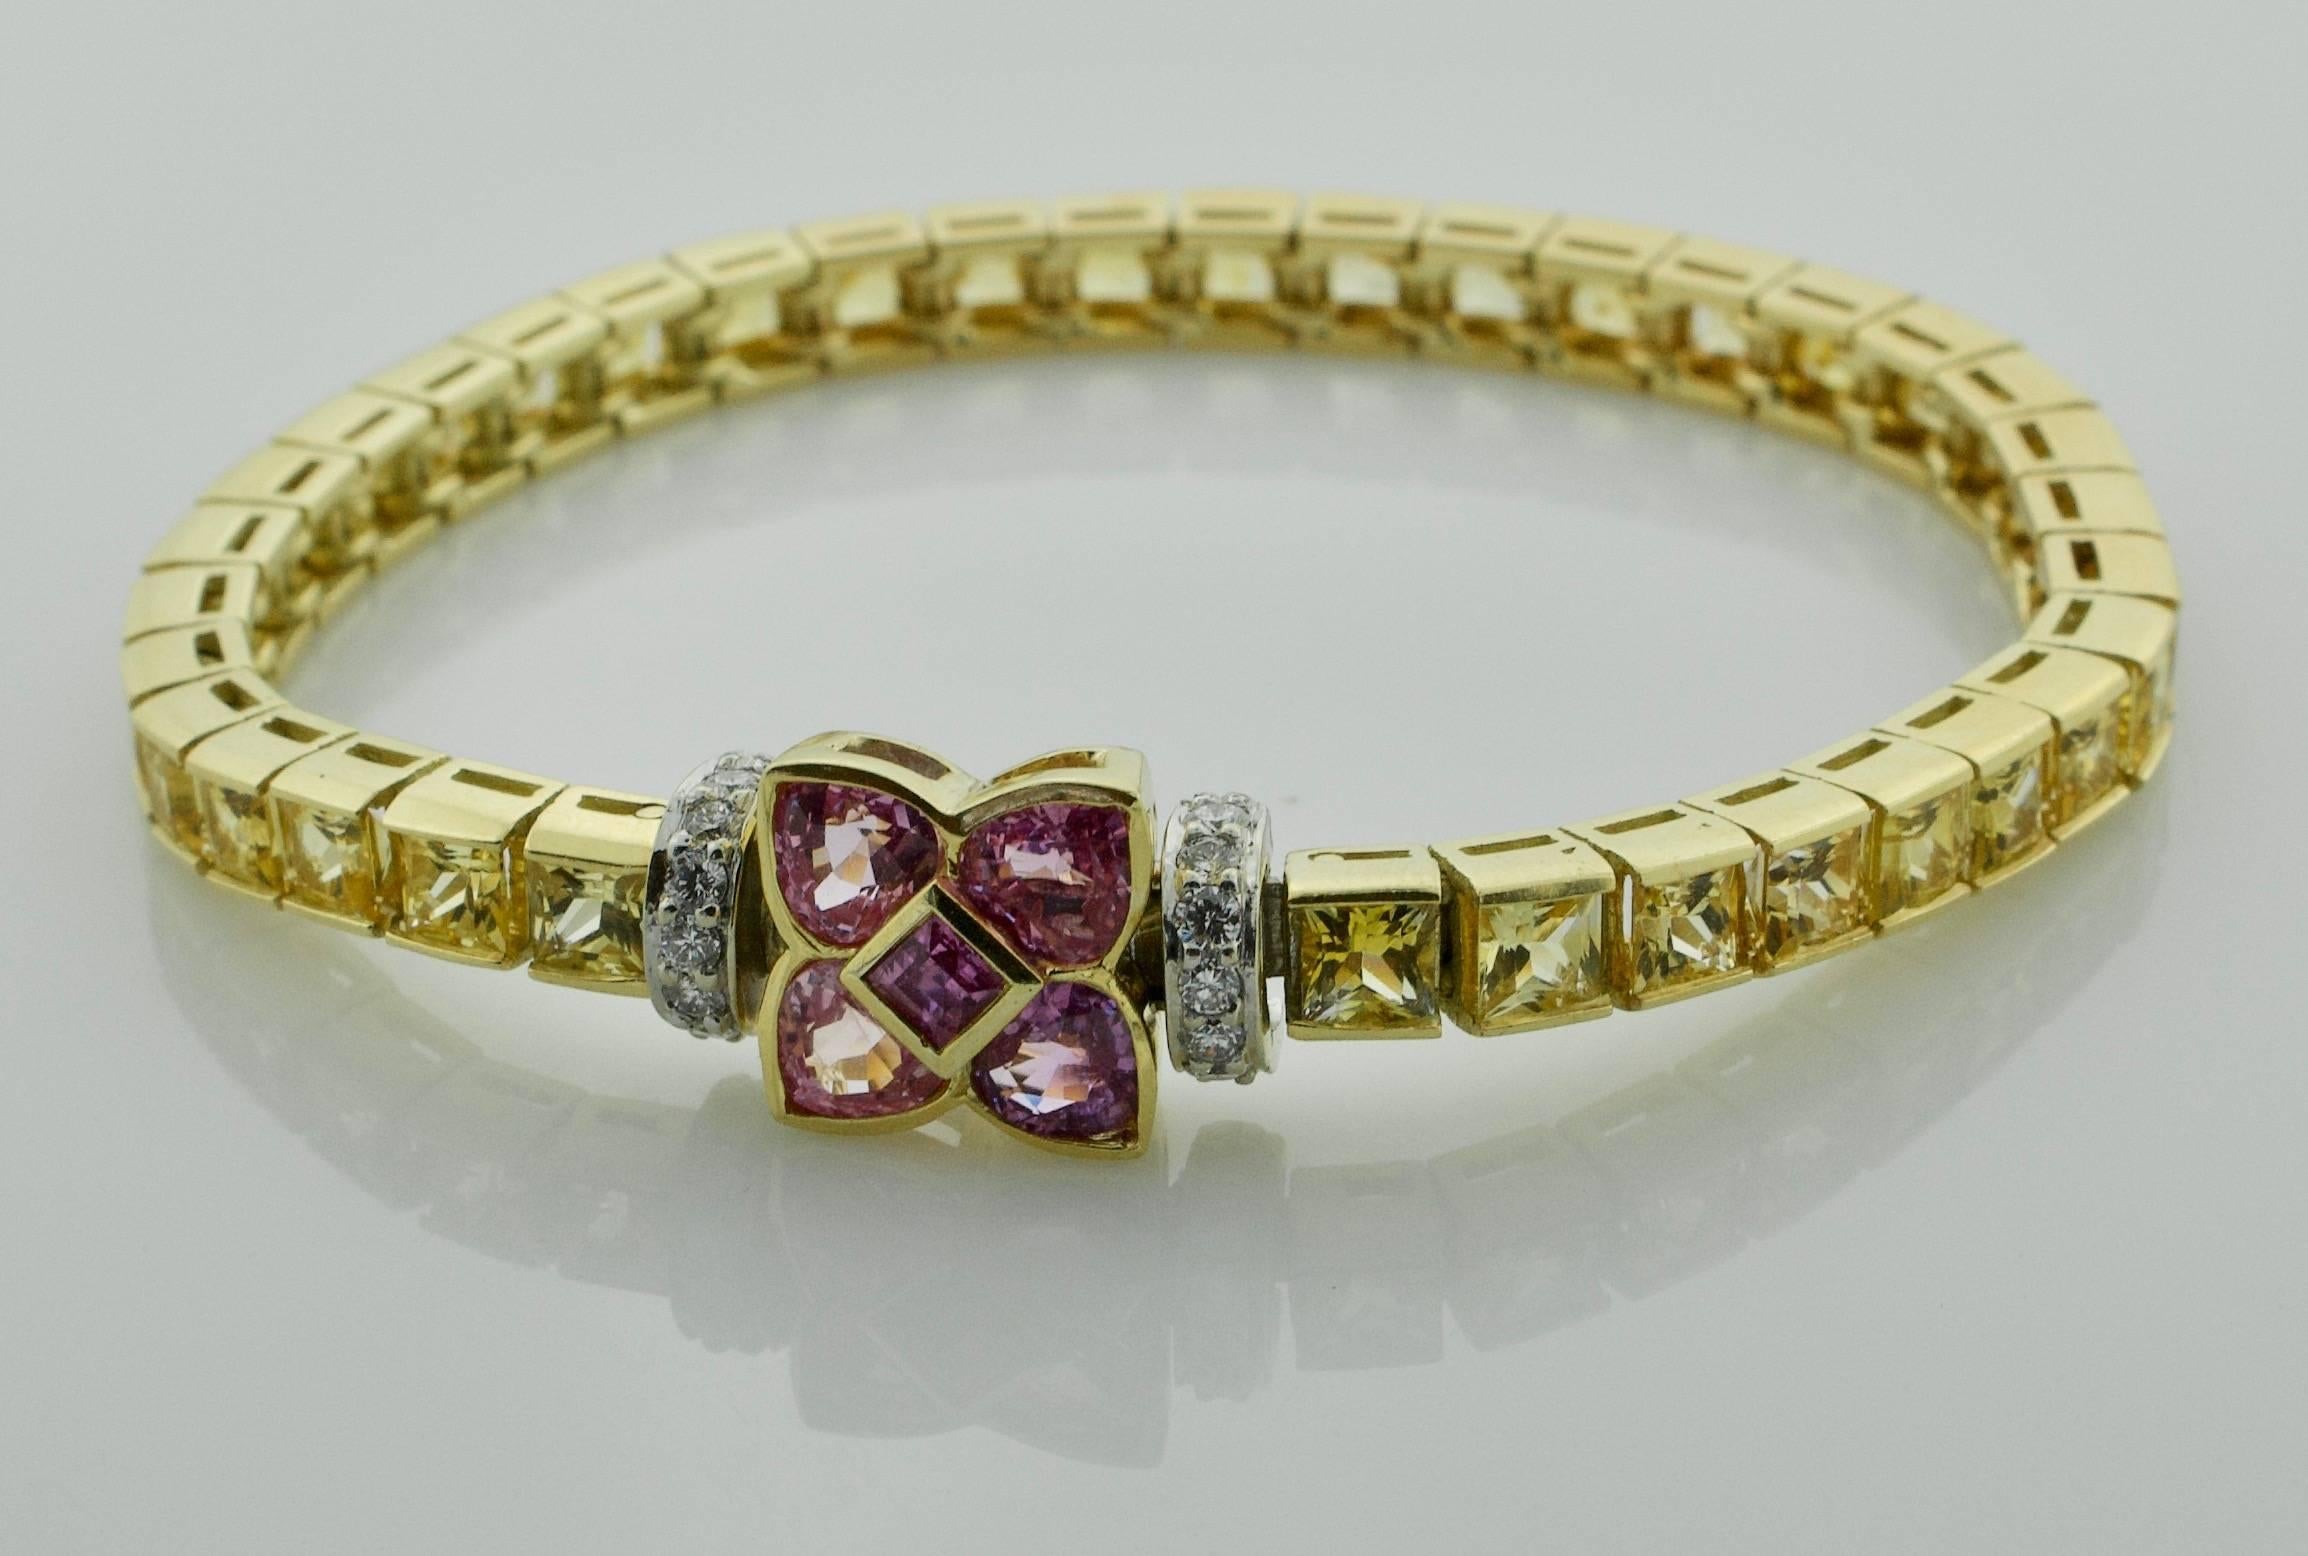 Ella Gafter Golden and Pink Sapphire and Diamonds Gold Flower Tennis Bracelet
Thirty Six French Cut Golden Sapphires weighing 18.00 carats approximately
Five Fancy Cut Pink Sapphires weighing 2.00 carats approximately
Fourteen Round Brilliant Cut